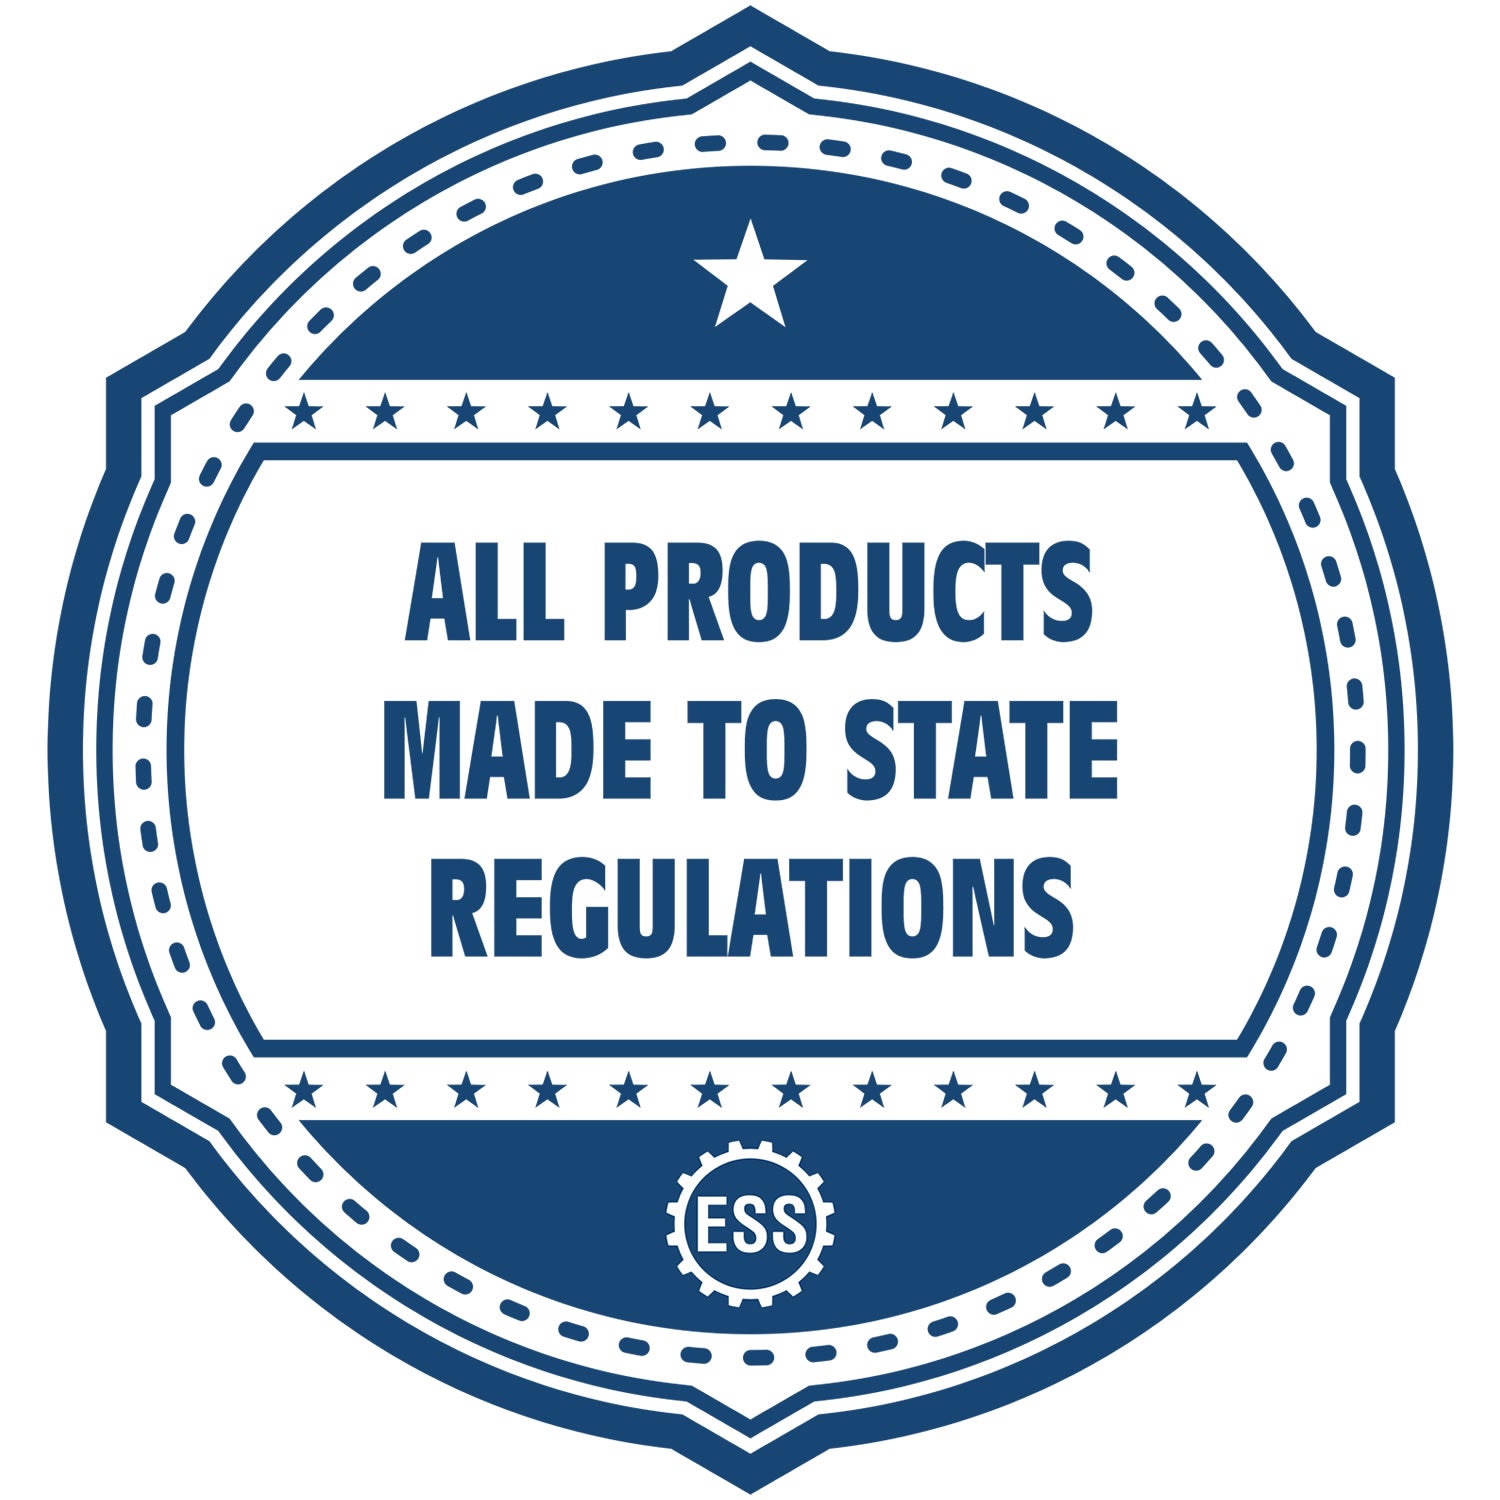 An icon or badge element for the Oklahoma Professional Engineer Seal Stamp showing that this product is made in compliance with state regulations.